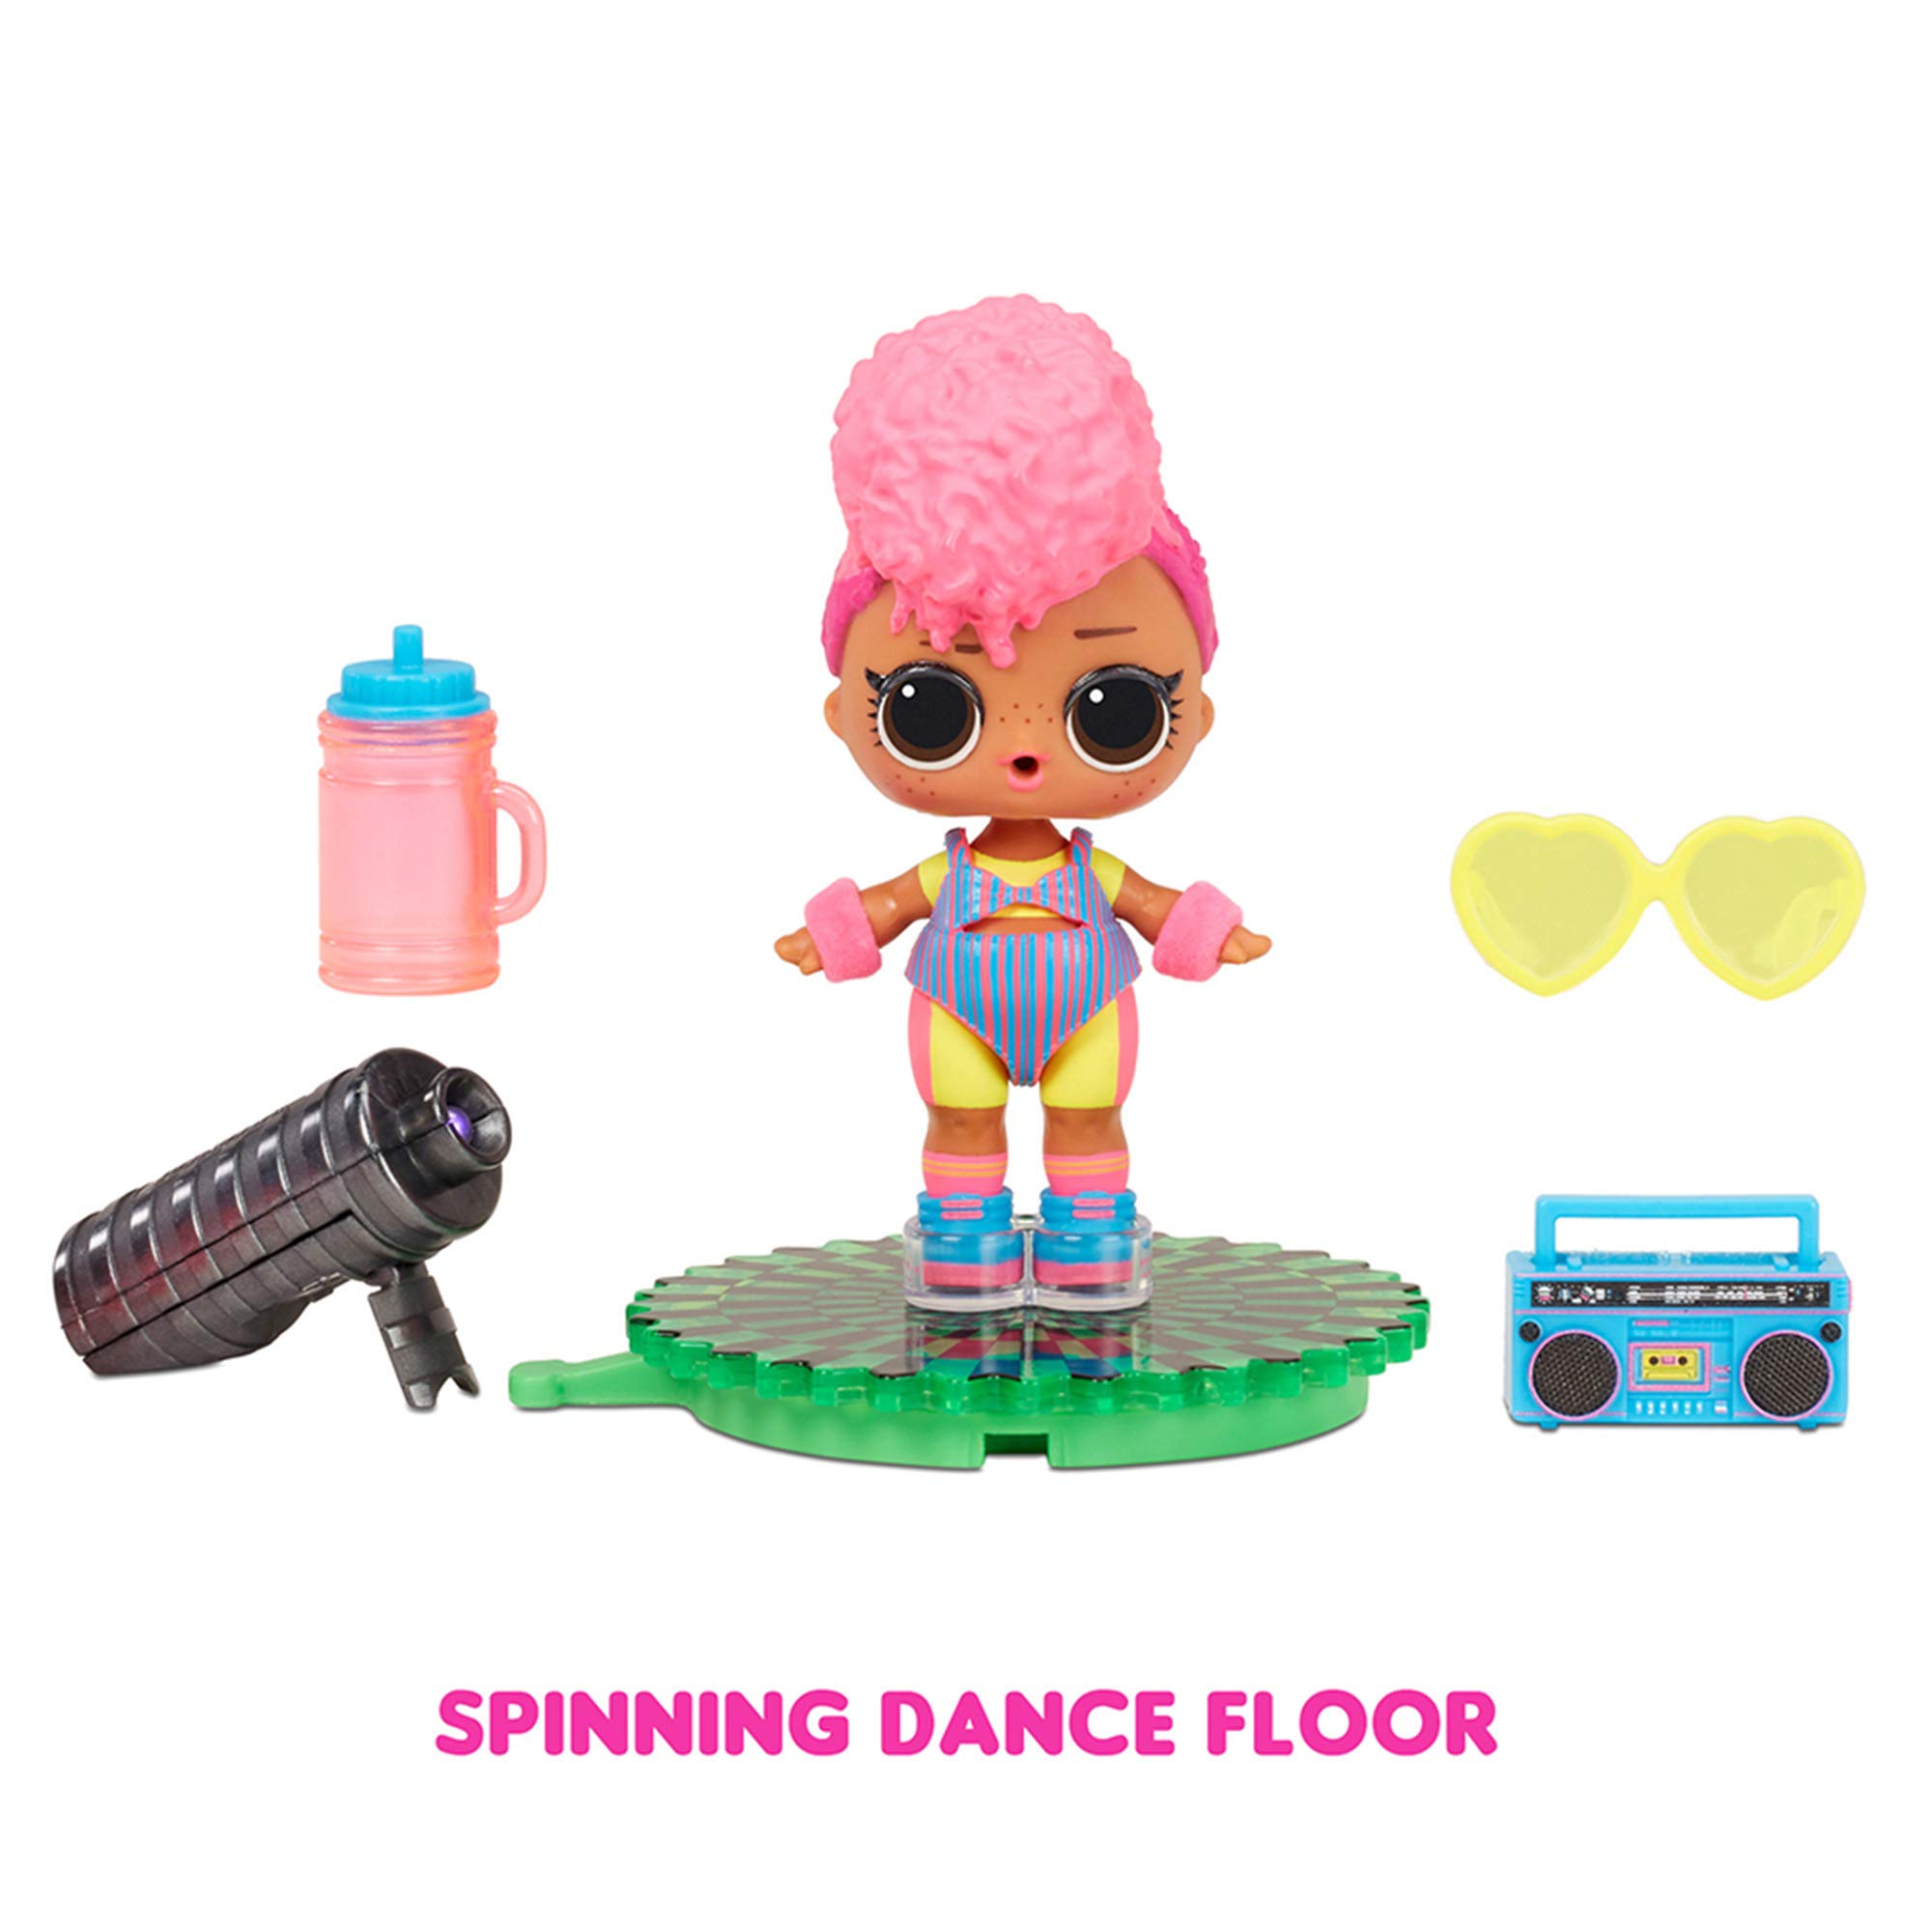 L.O.L. Surprise! Dance Dolls with 8 Surprises Including Doll Dance Floor That Spins, Dance Move Card and Accessories - Great Gift for Girls Age 4-7